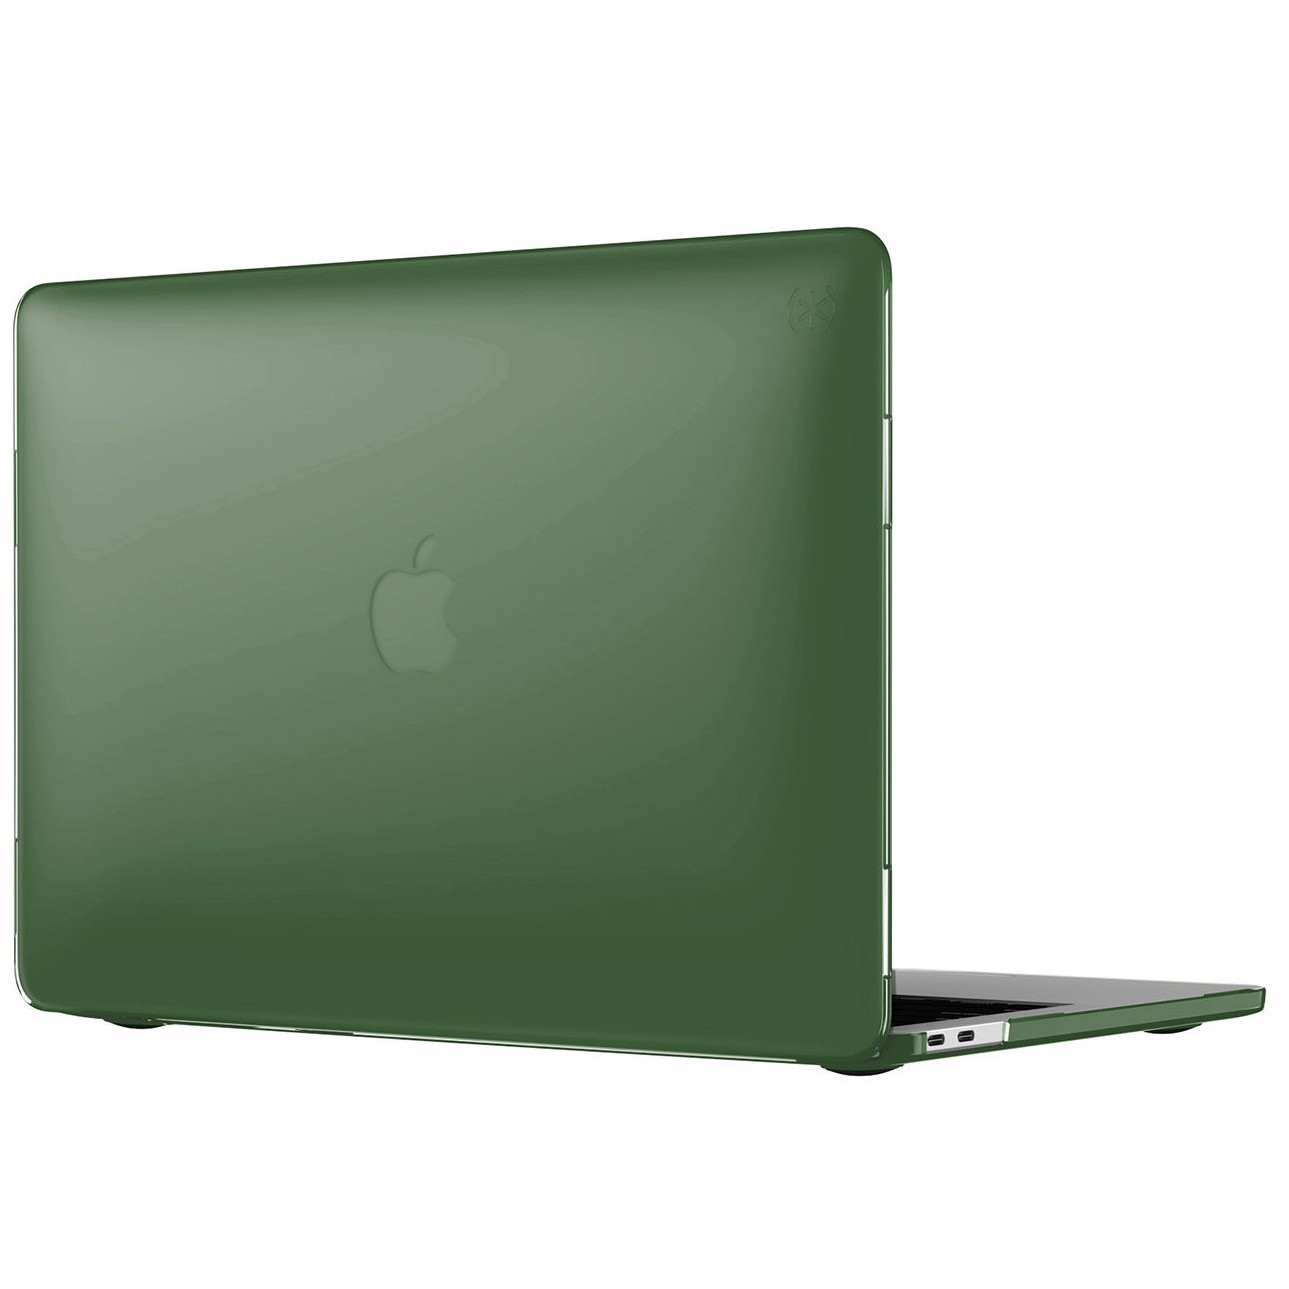 Hard case for macbook pro with retina display tv shop24